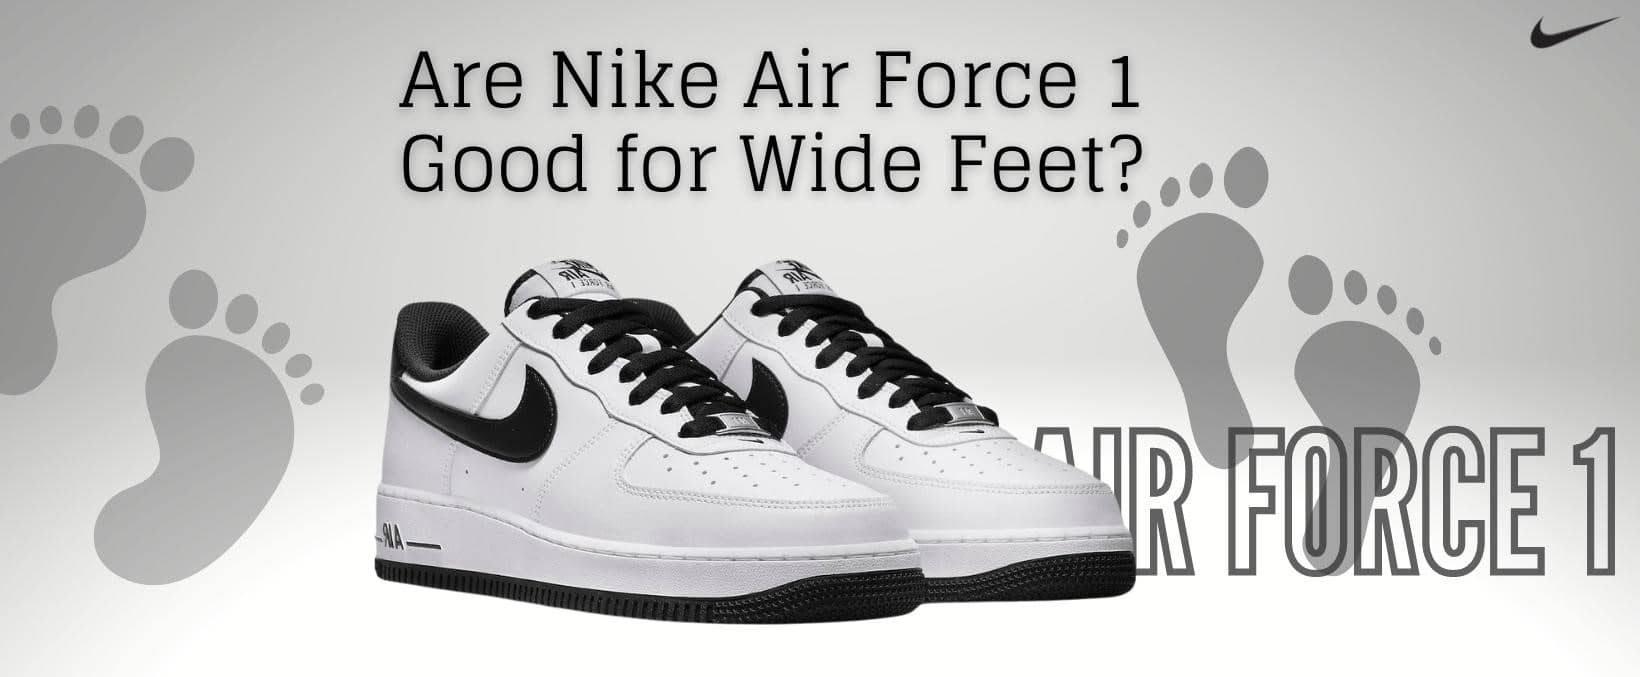 Are Nike Air Force 1 Good for Wide Feet?